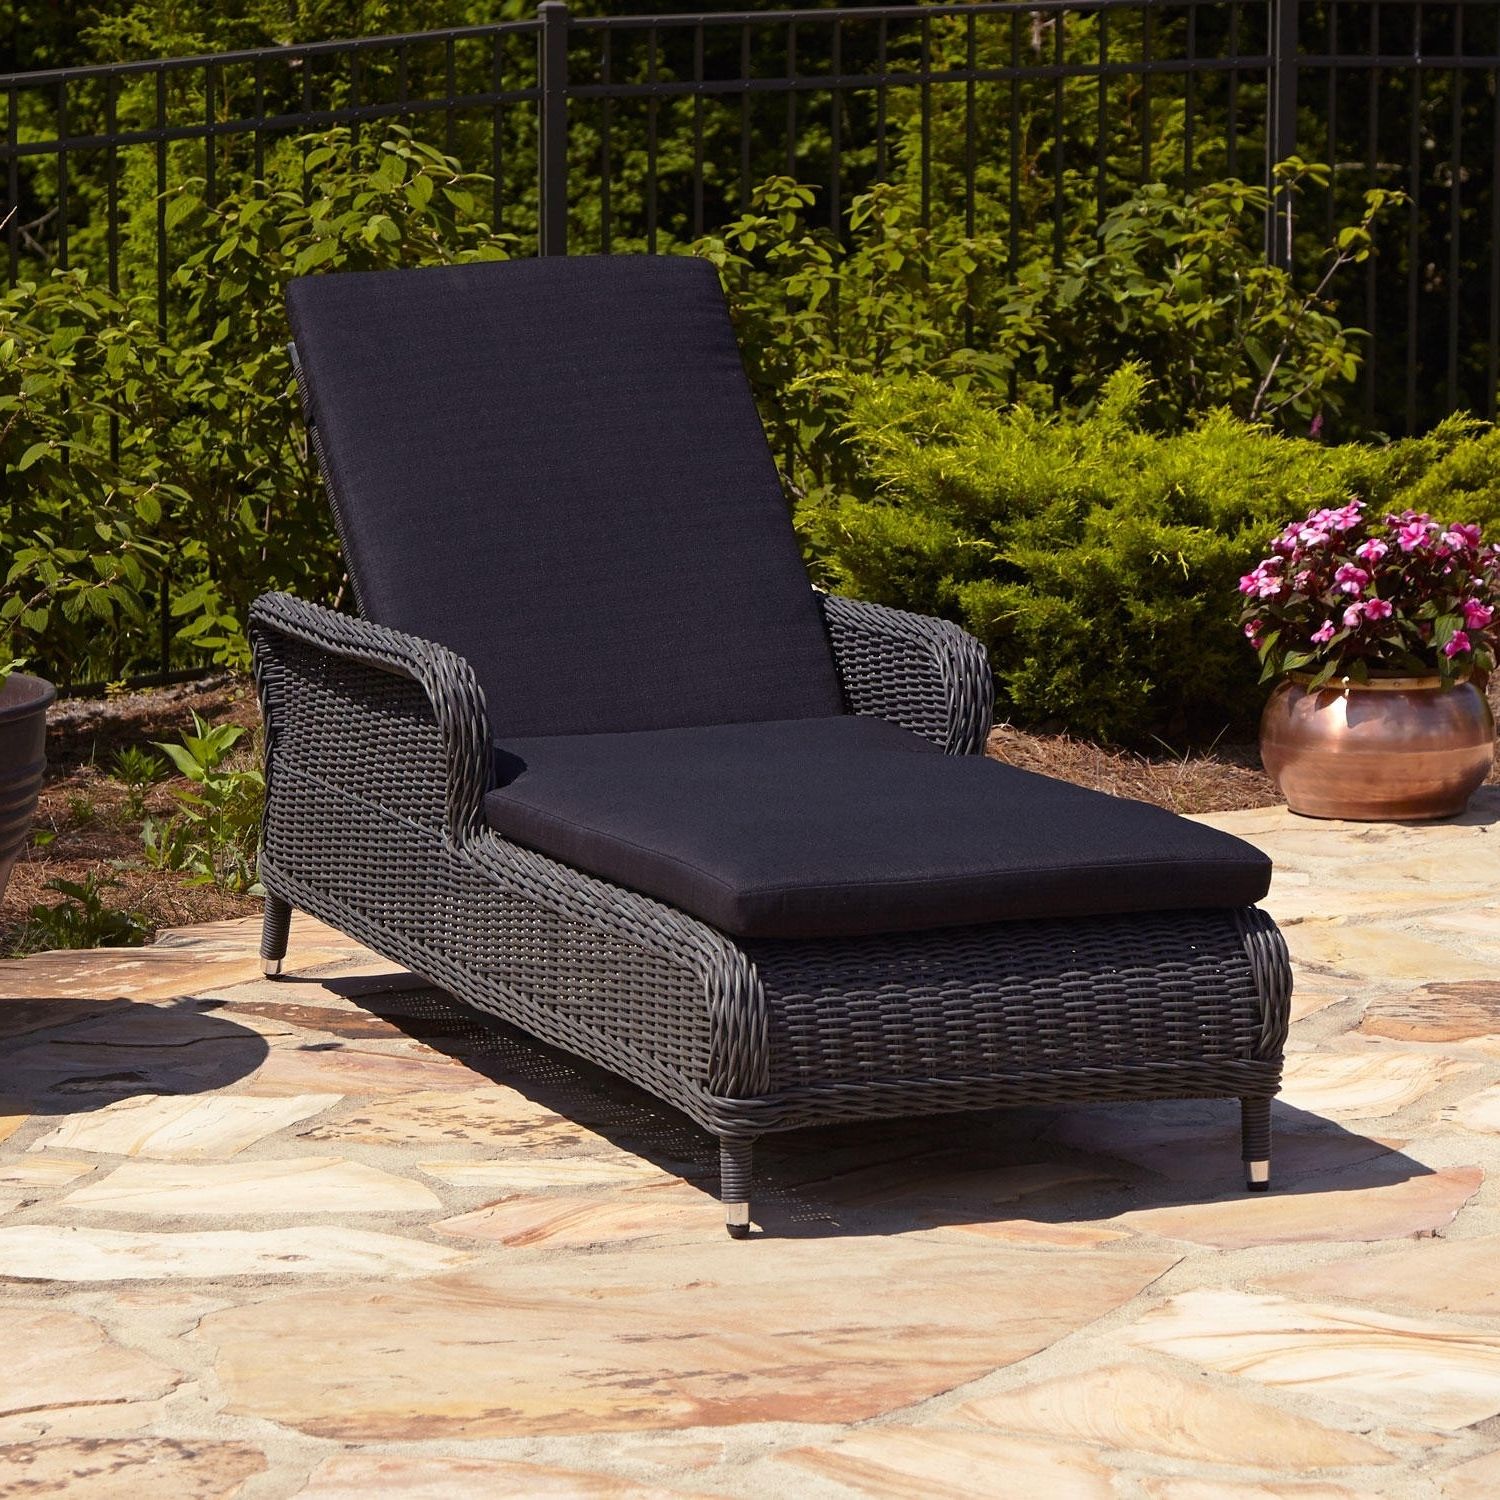 Eliana Outdoor Brown Wicker Chaise Lounge Chairs For Well Liked Remarkable Wicker Chaise Lounge Chair Gray Patio Furniture All (View 3 of 15)